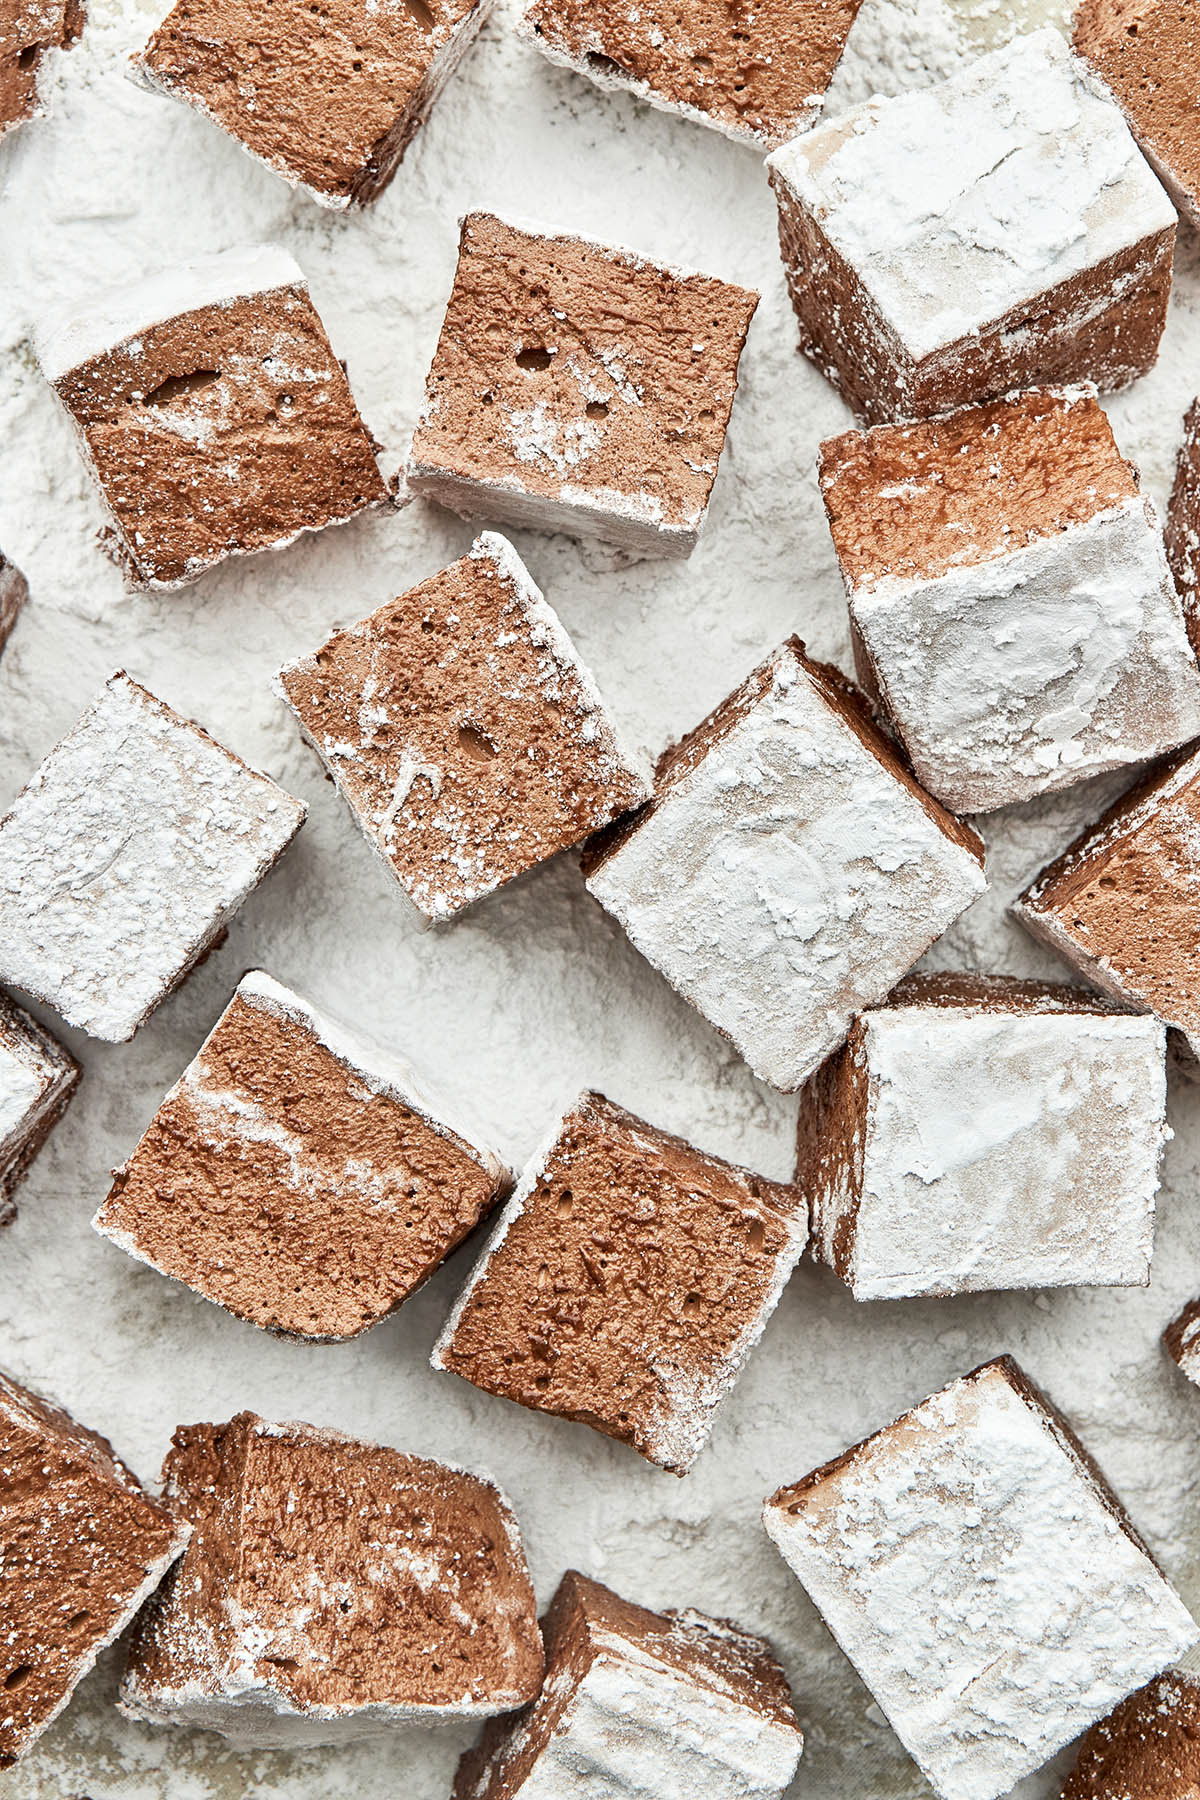 Several cocoa marshmallow squares sitting in powdered sugar.